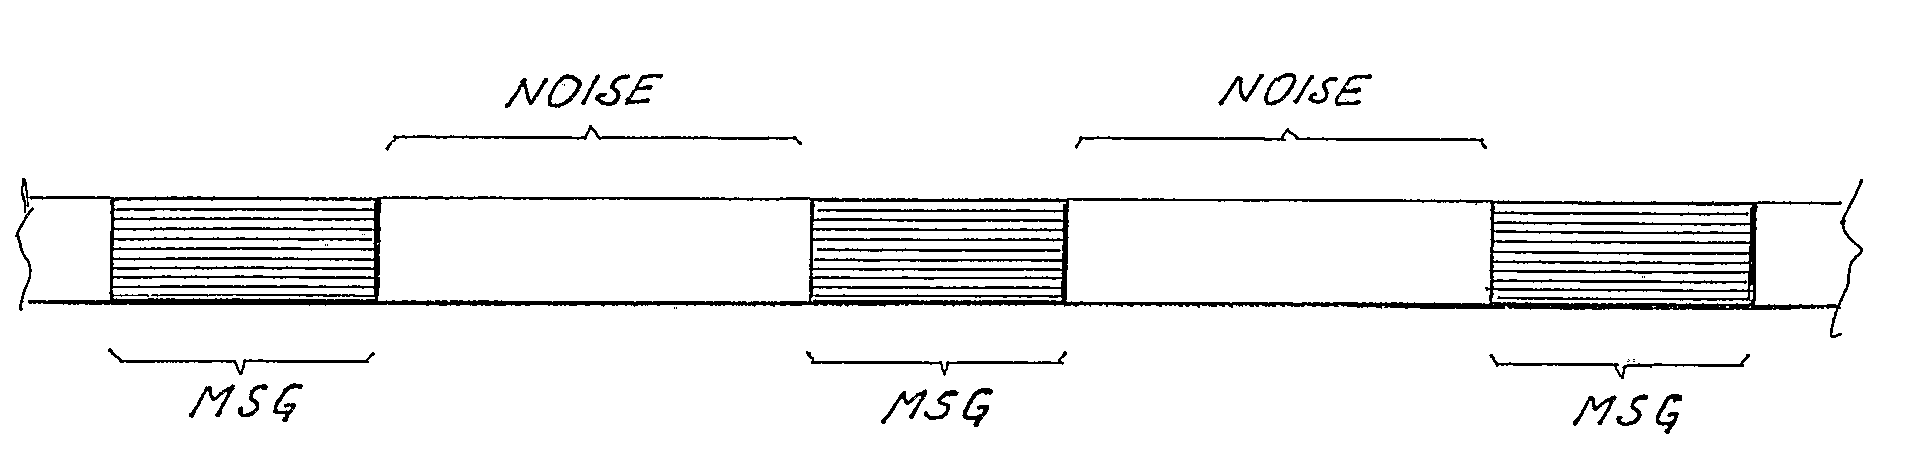 Method and system for detecting messages in the presence of noise